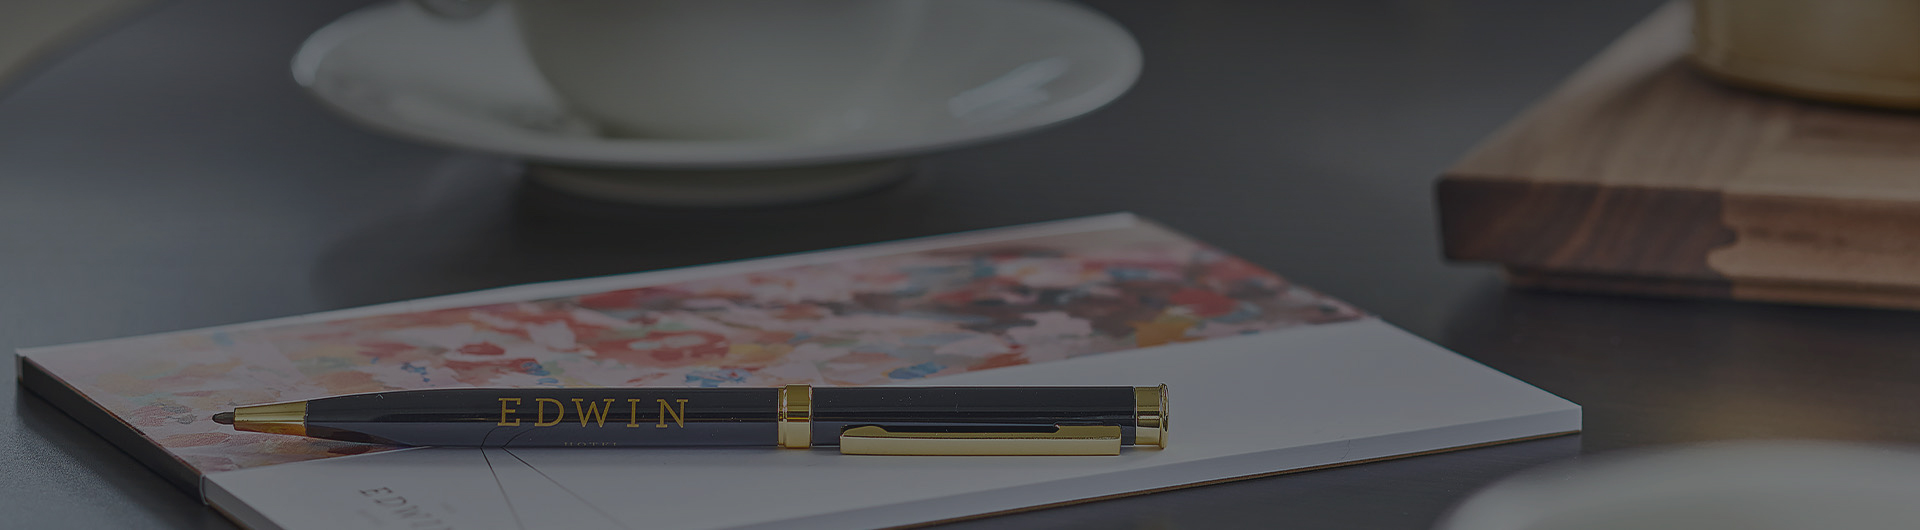 close up of a pen on a table with EDWIN on it sitting on a notebook